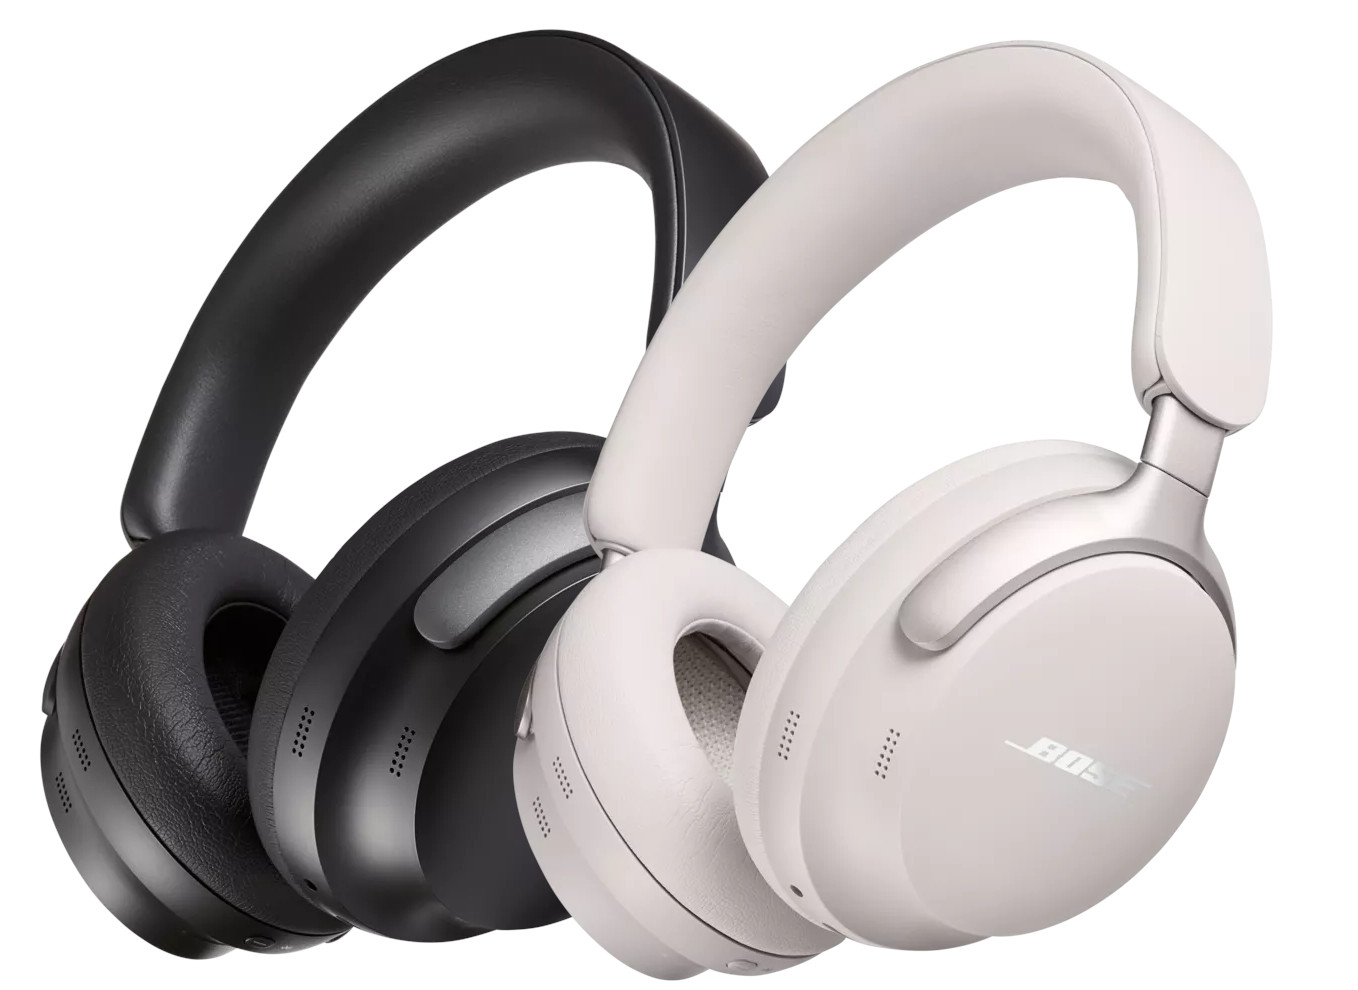 Bose Launches QuietComfort Ultra Headphones, Along With New QC